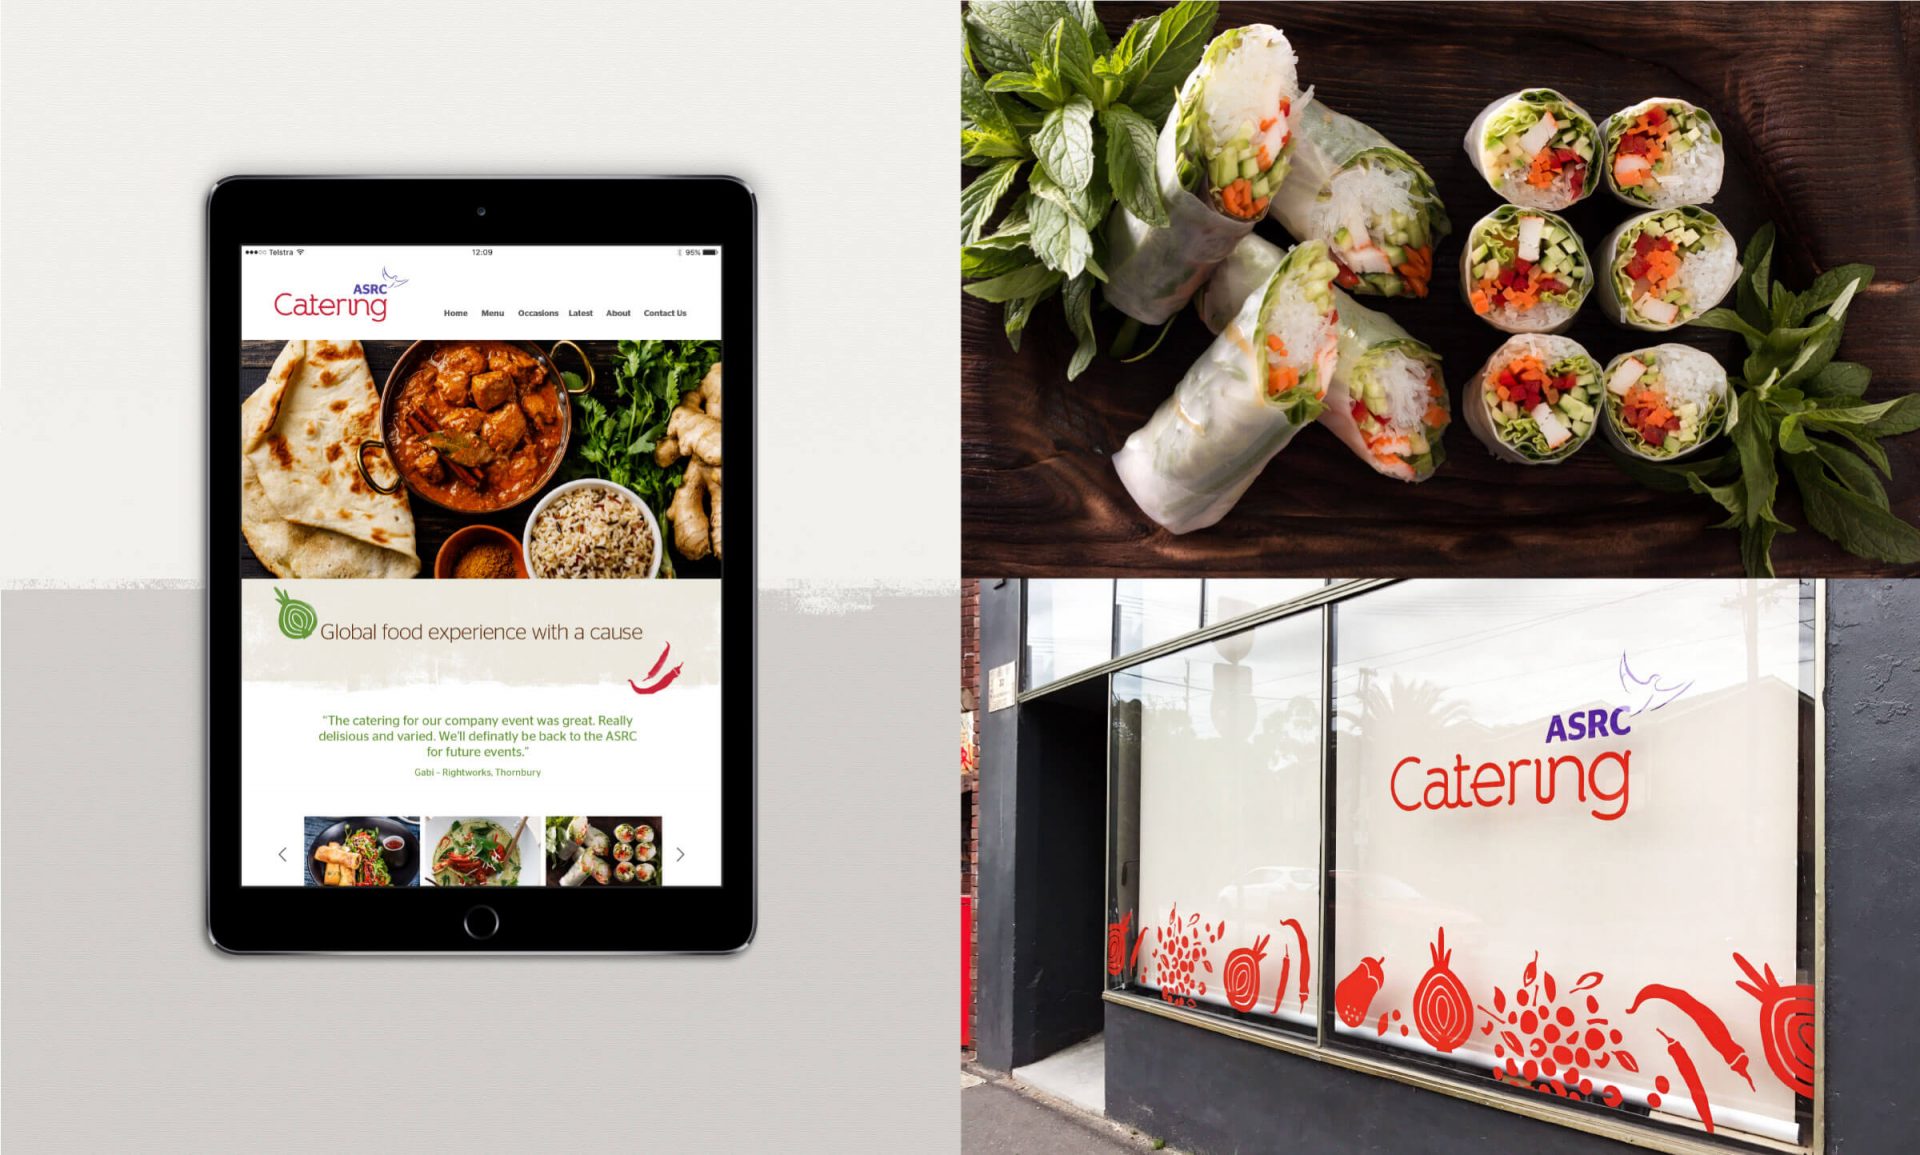 Branding for ASRC catering used across their website and street frontage, with photography of their food